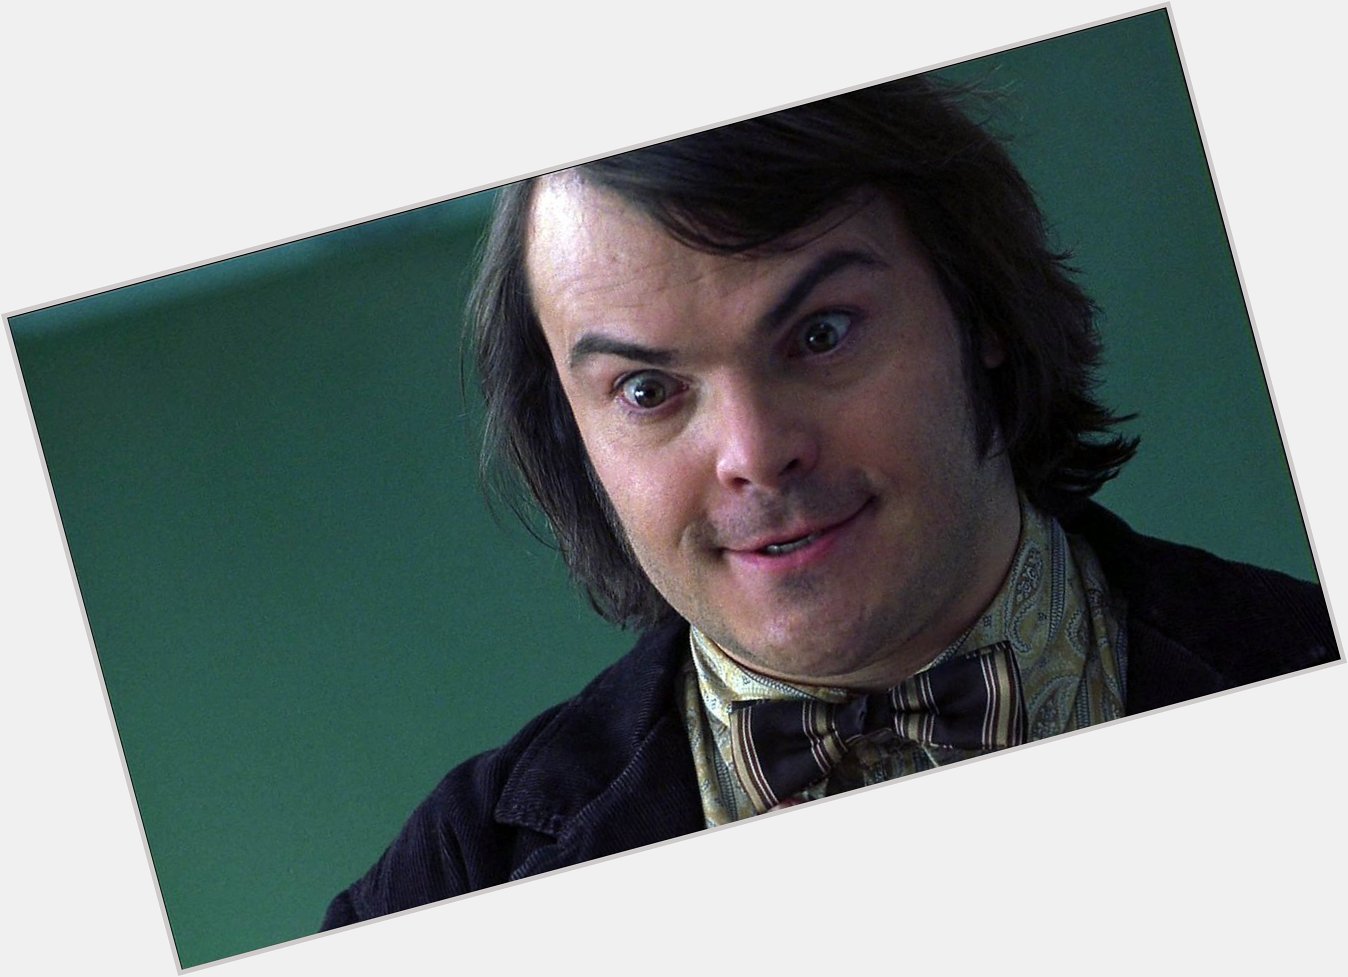 Happy birthday to one of our favorite comedians - Jack Black! 